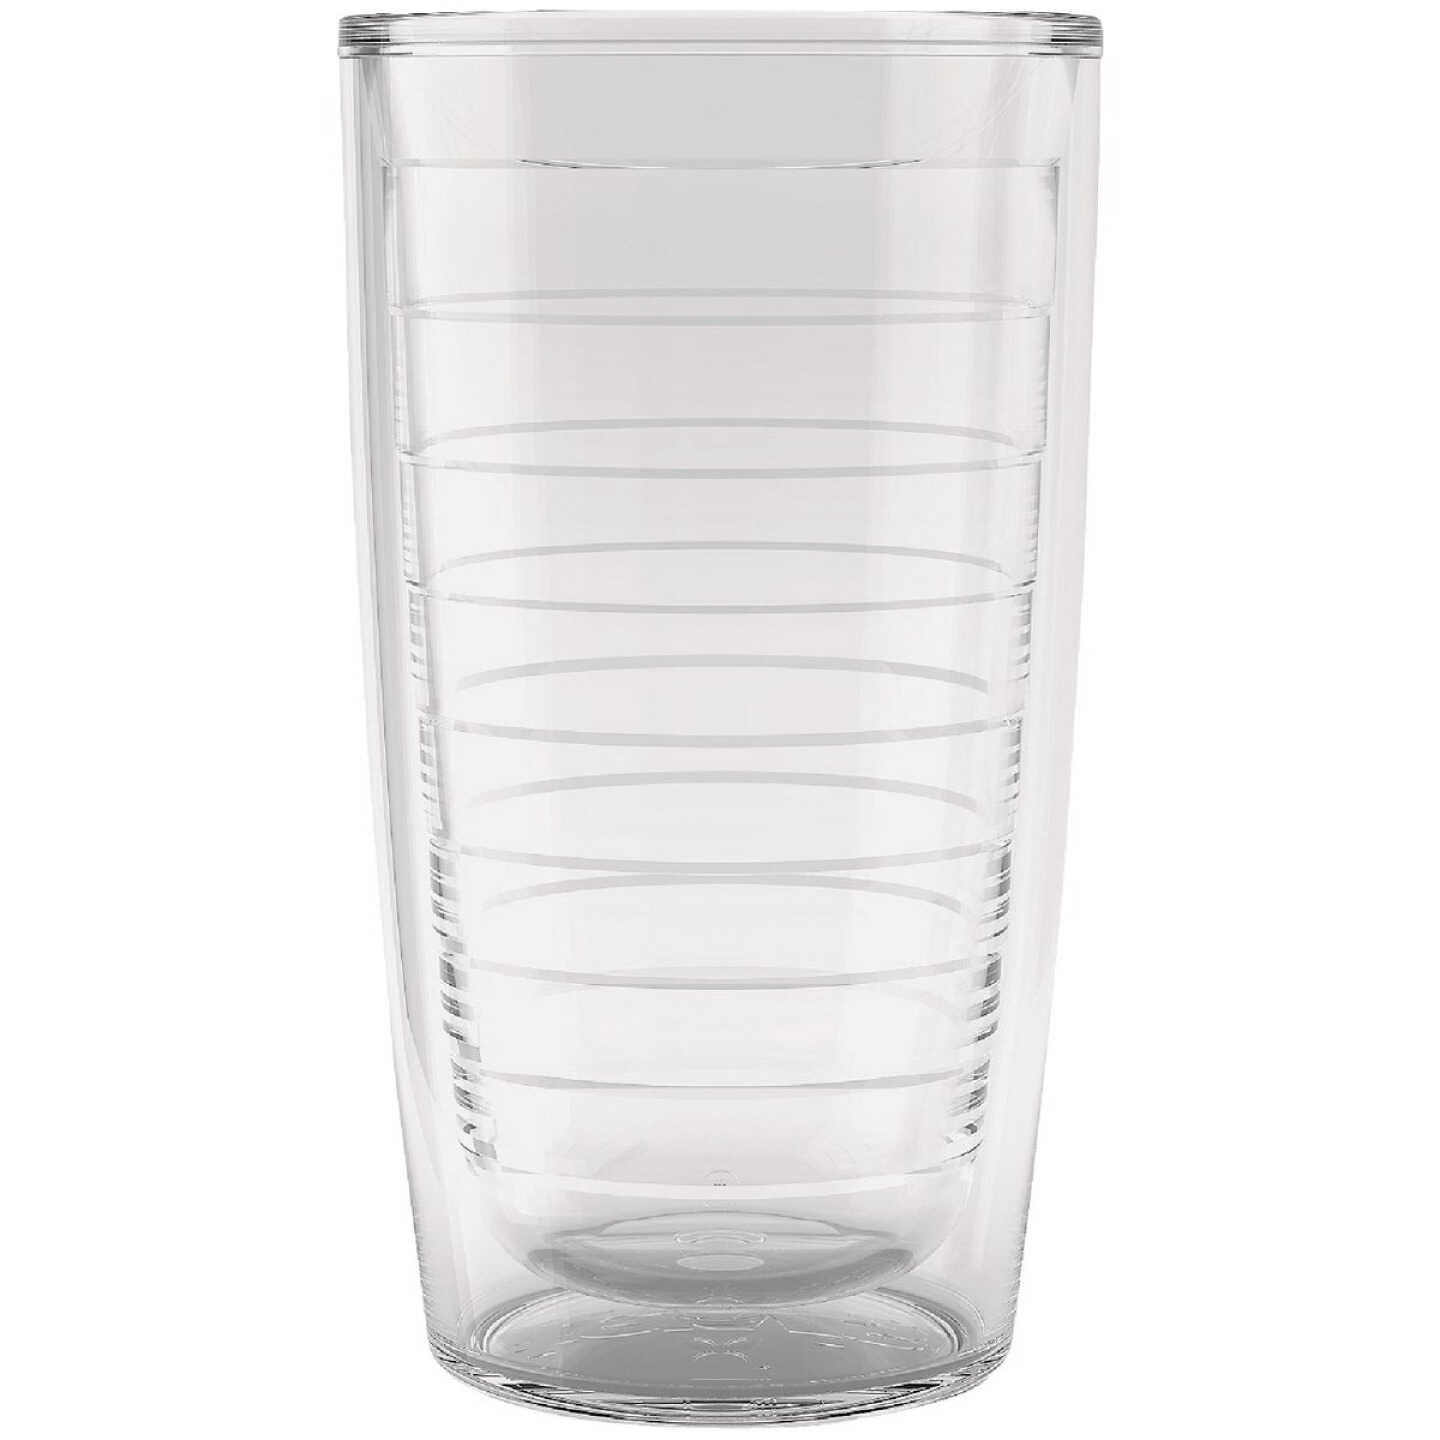 Tervis Clear & Colorful 16 Oz. Insulated Tumbler - Tahlequah Lumber